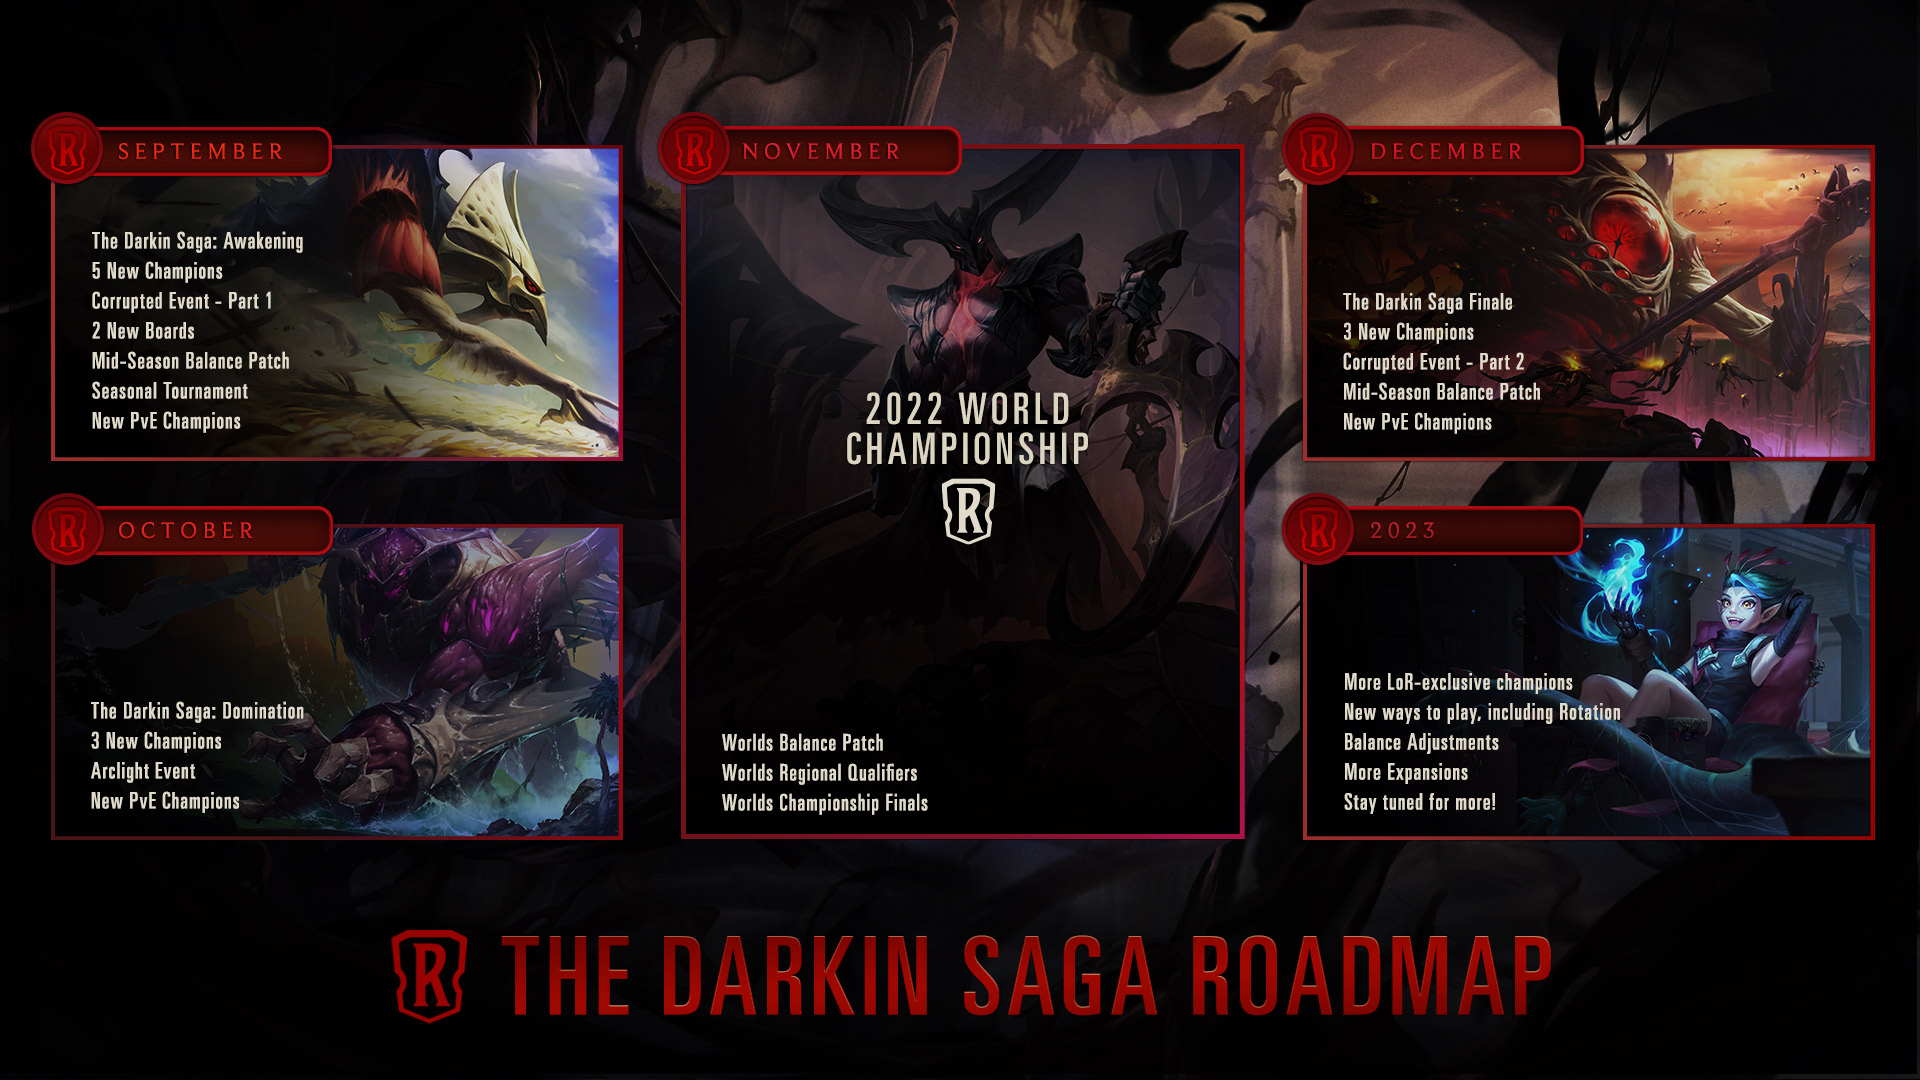 Legends of Runeterra's roadmap heralds the arrival of the Darkin Saga's new  events and champions